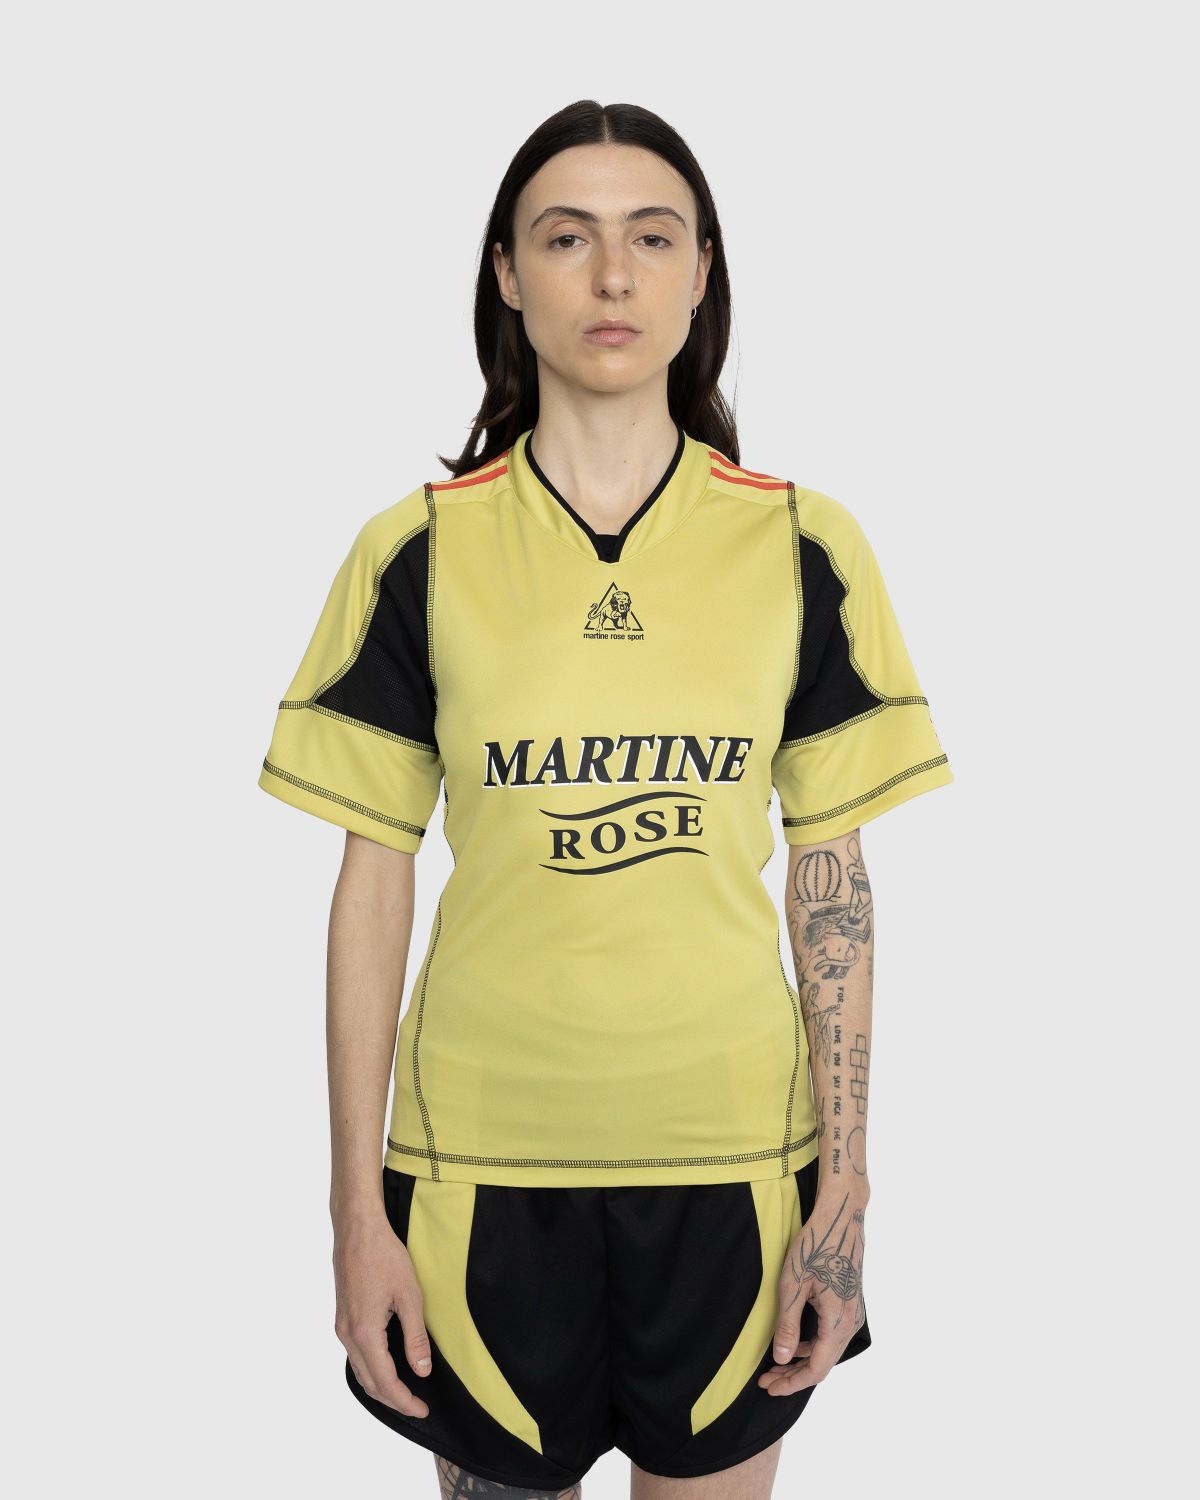 Martine Rose's brand of footy terraces skeeze is a SS22 mood